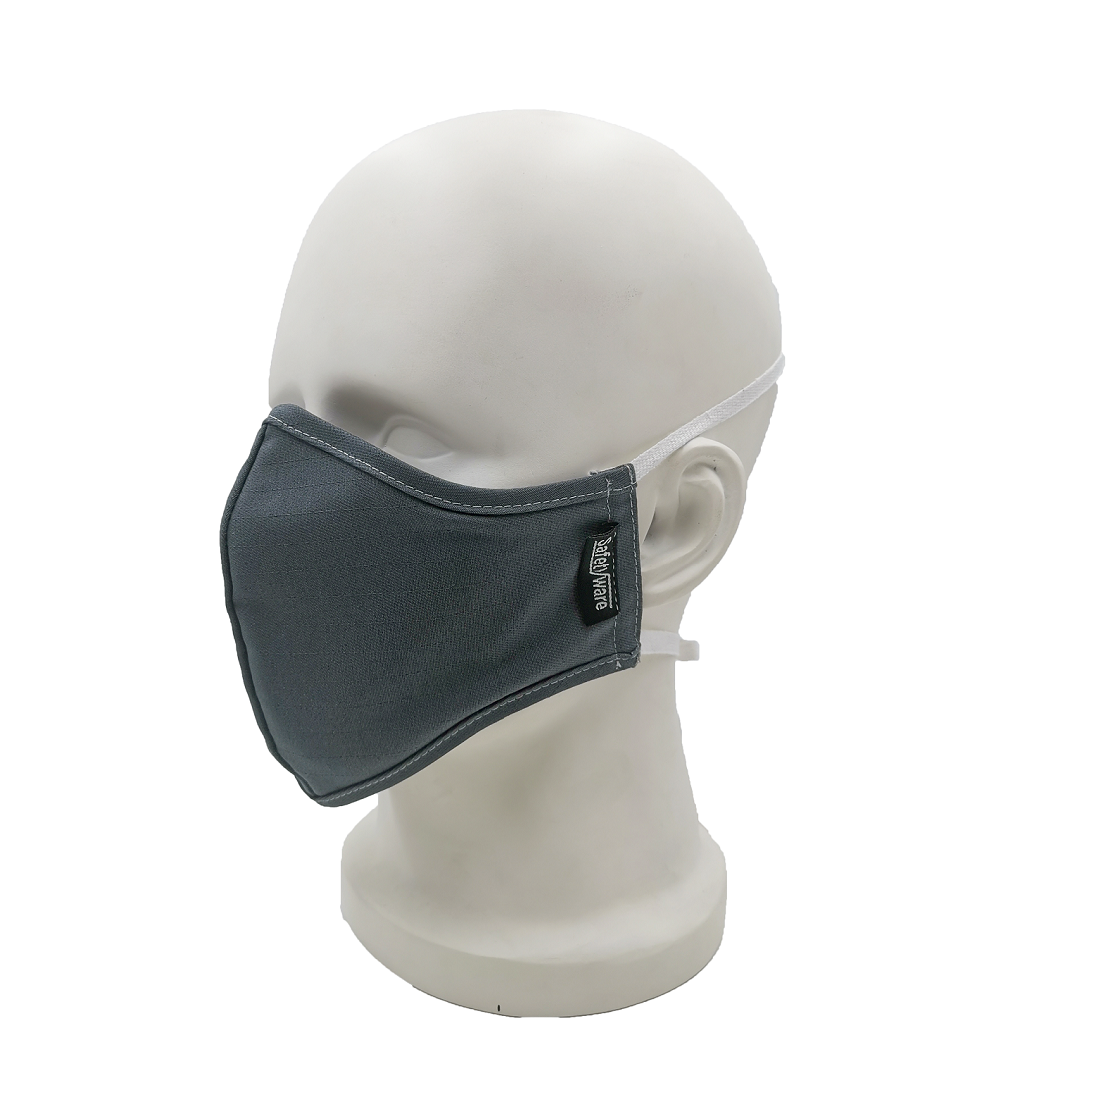 Safetyware 3 Layer Washable Fabric Face Mask Safetyware Sdn Bhd